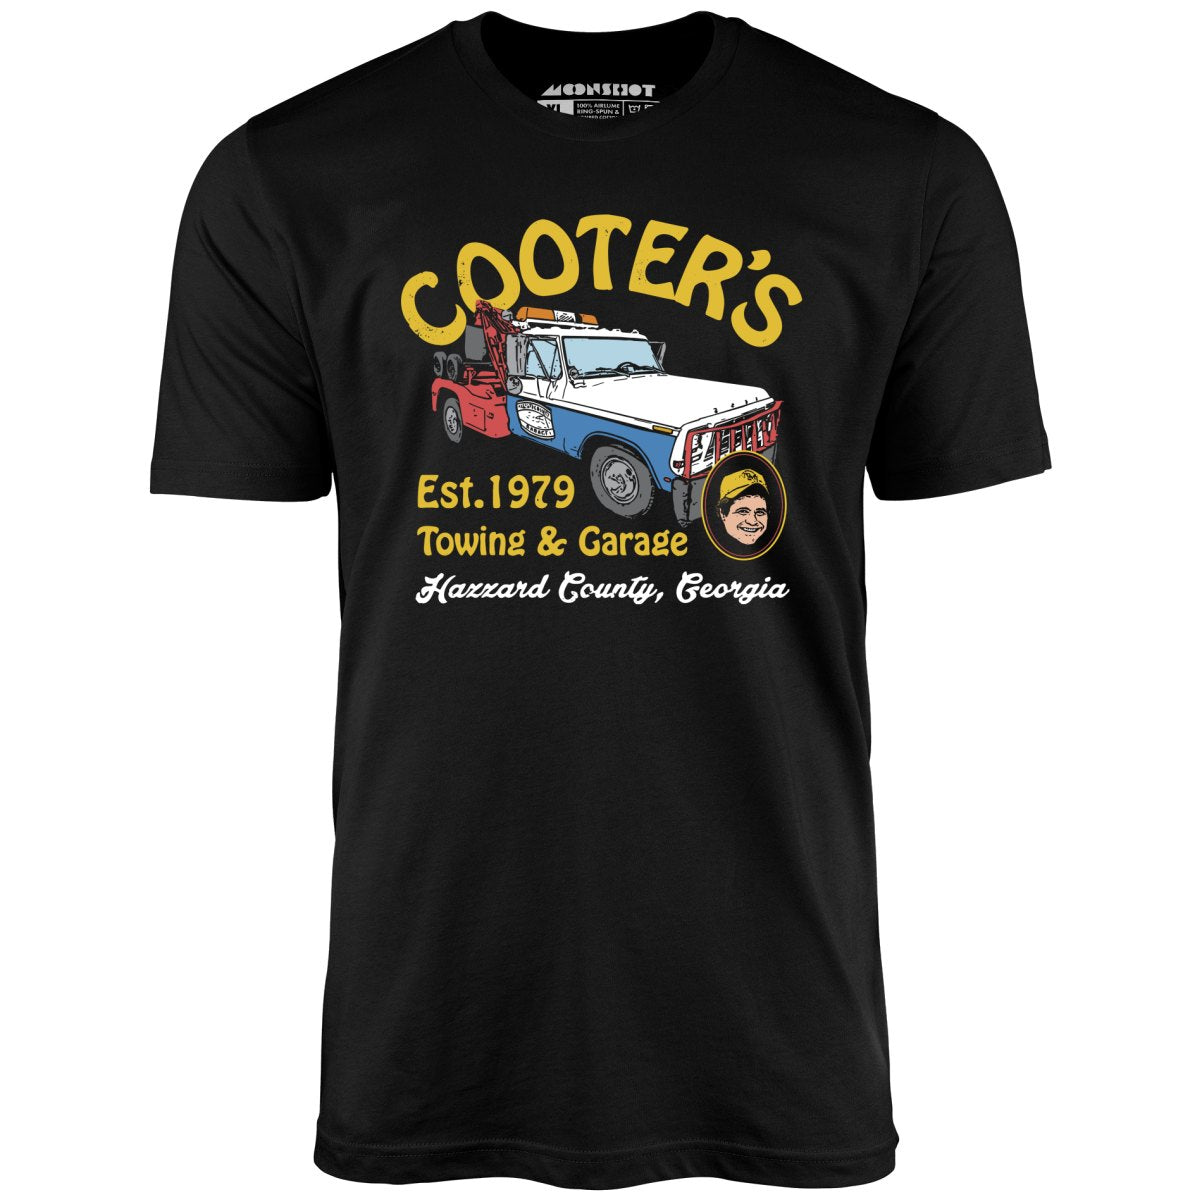 Cooter's Towing & Garage - Unisex T-Shirt